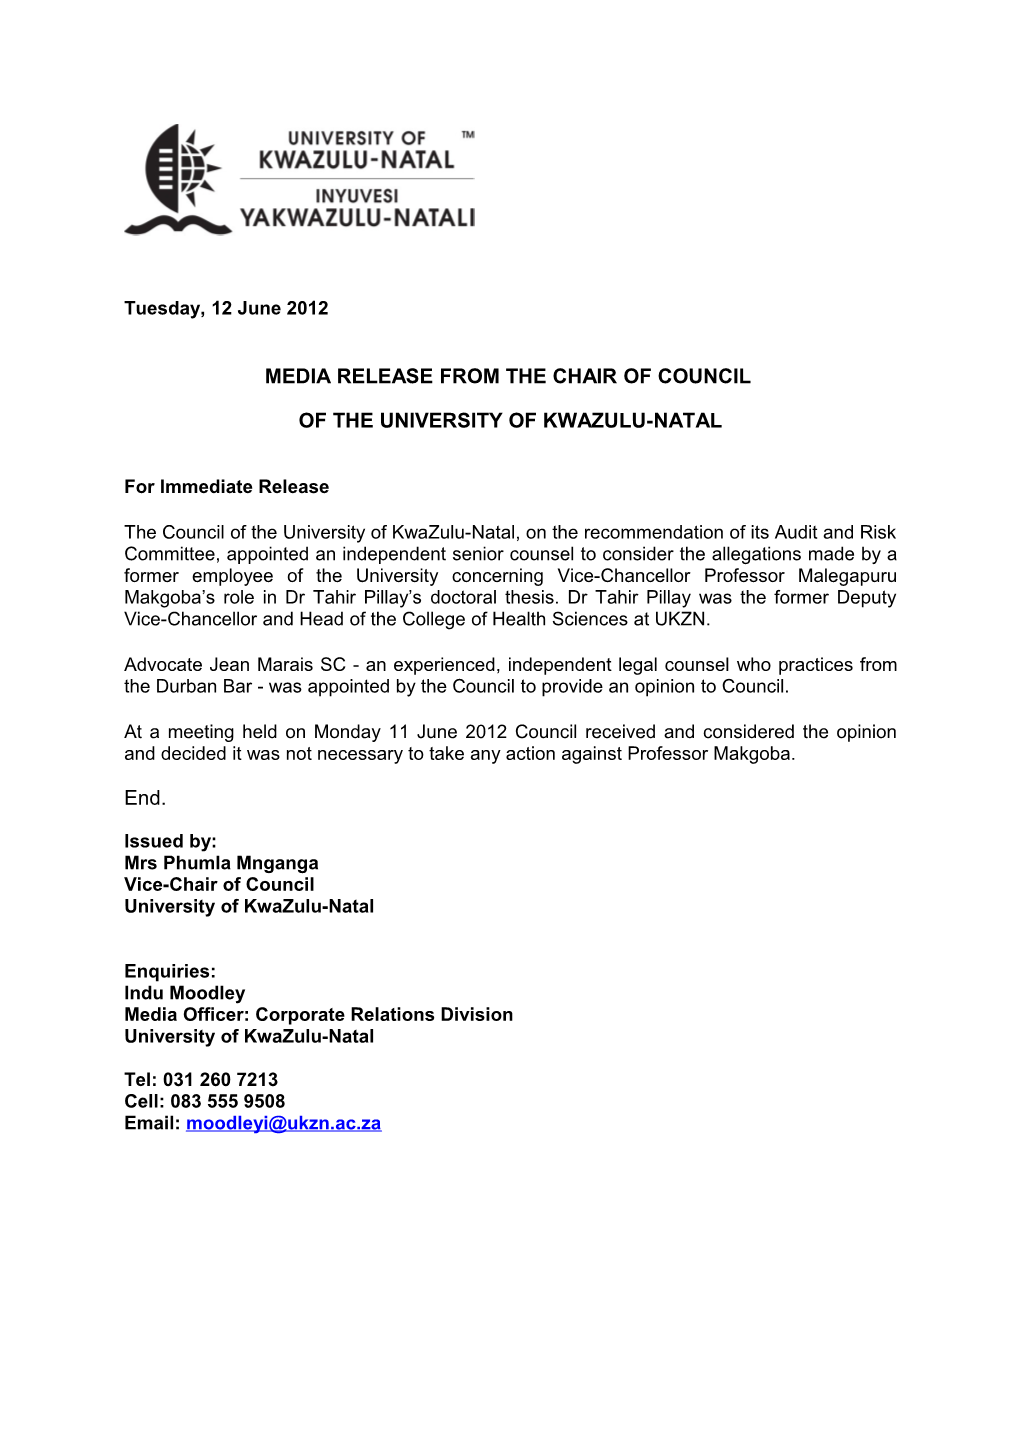 Media Release from the Chair of Council